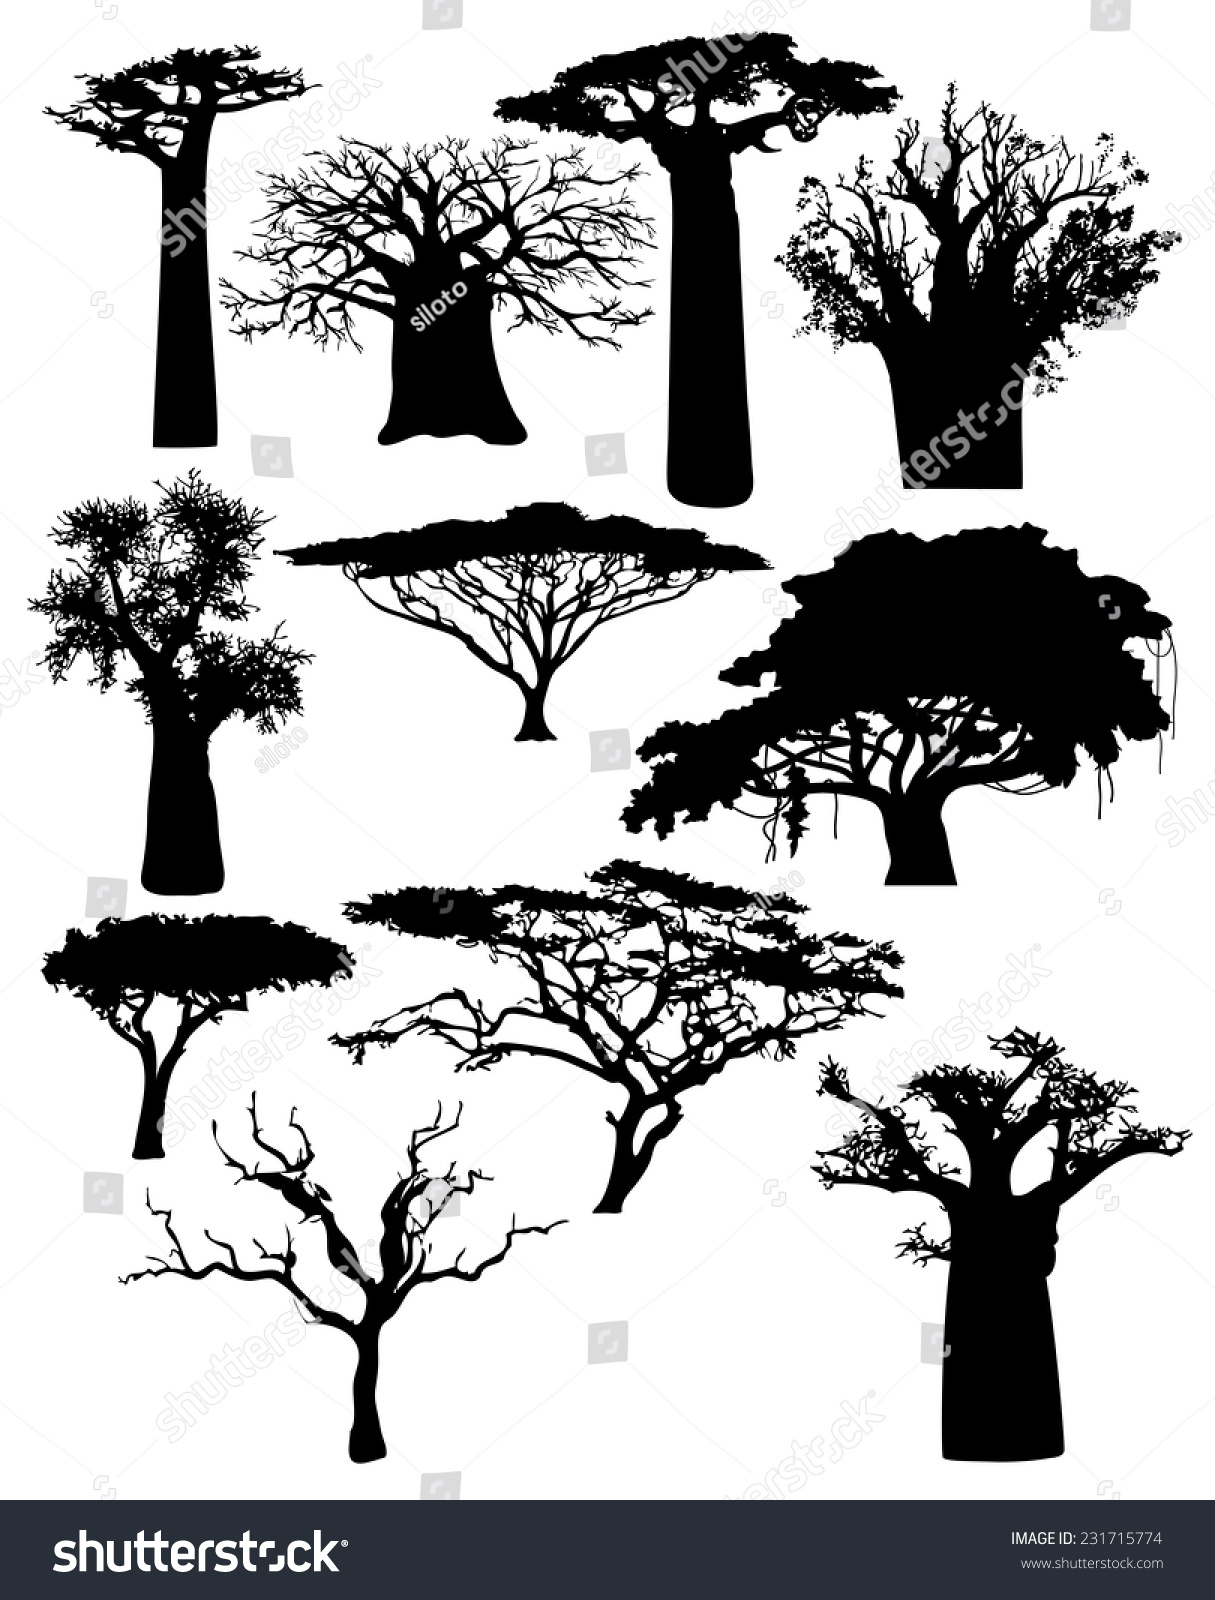 SVG of various African trees and bushes svg